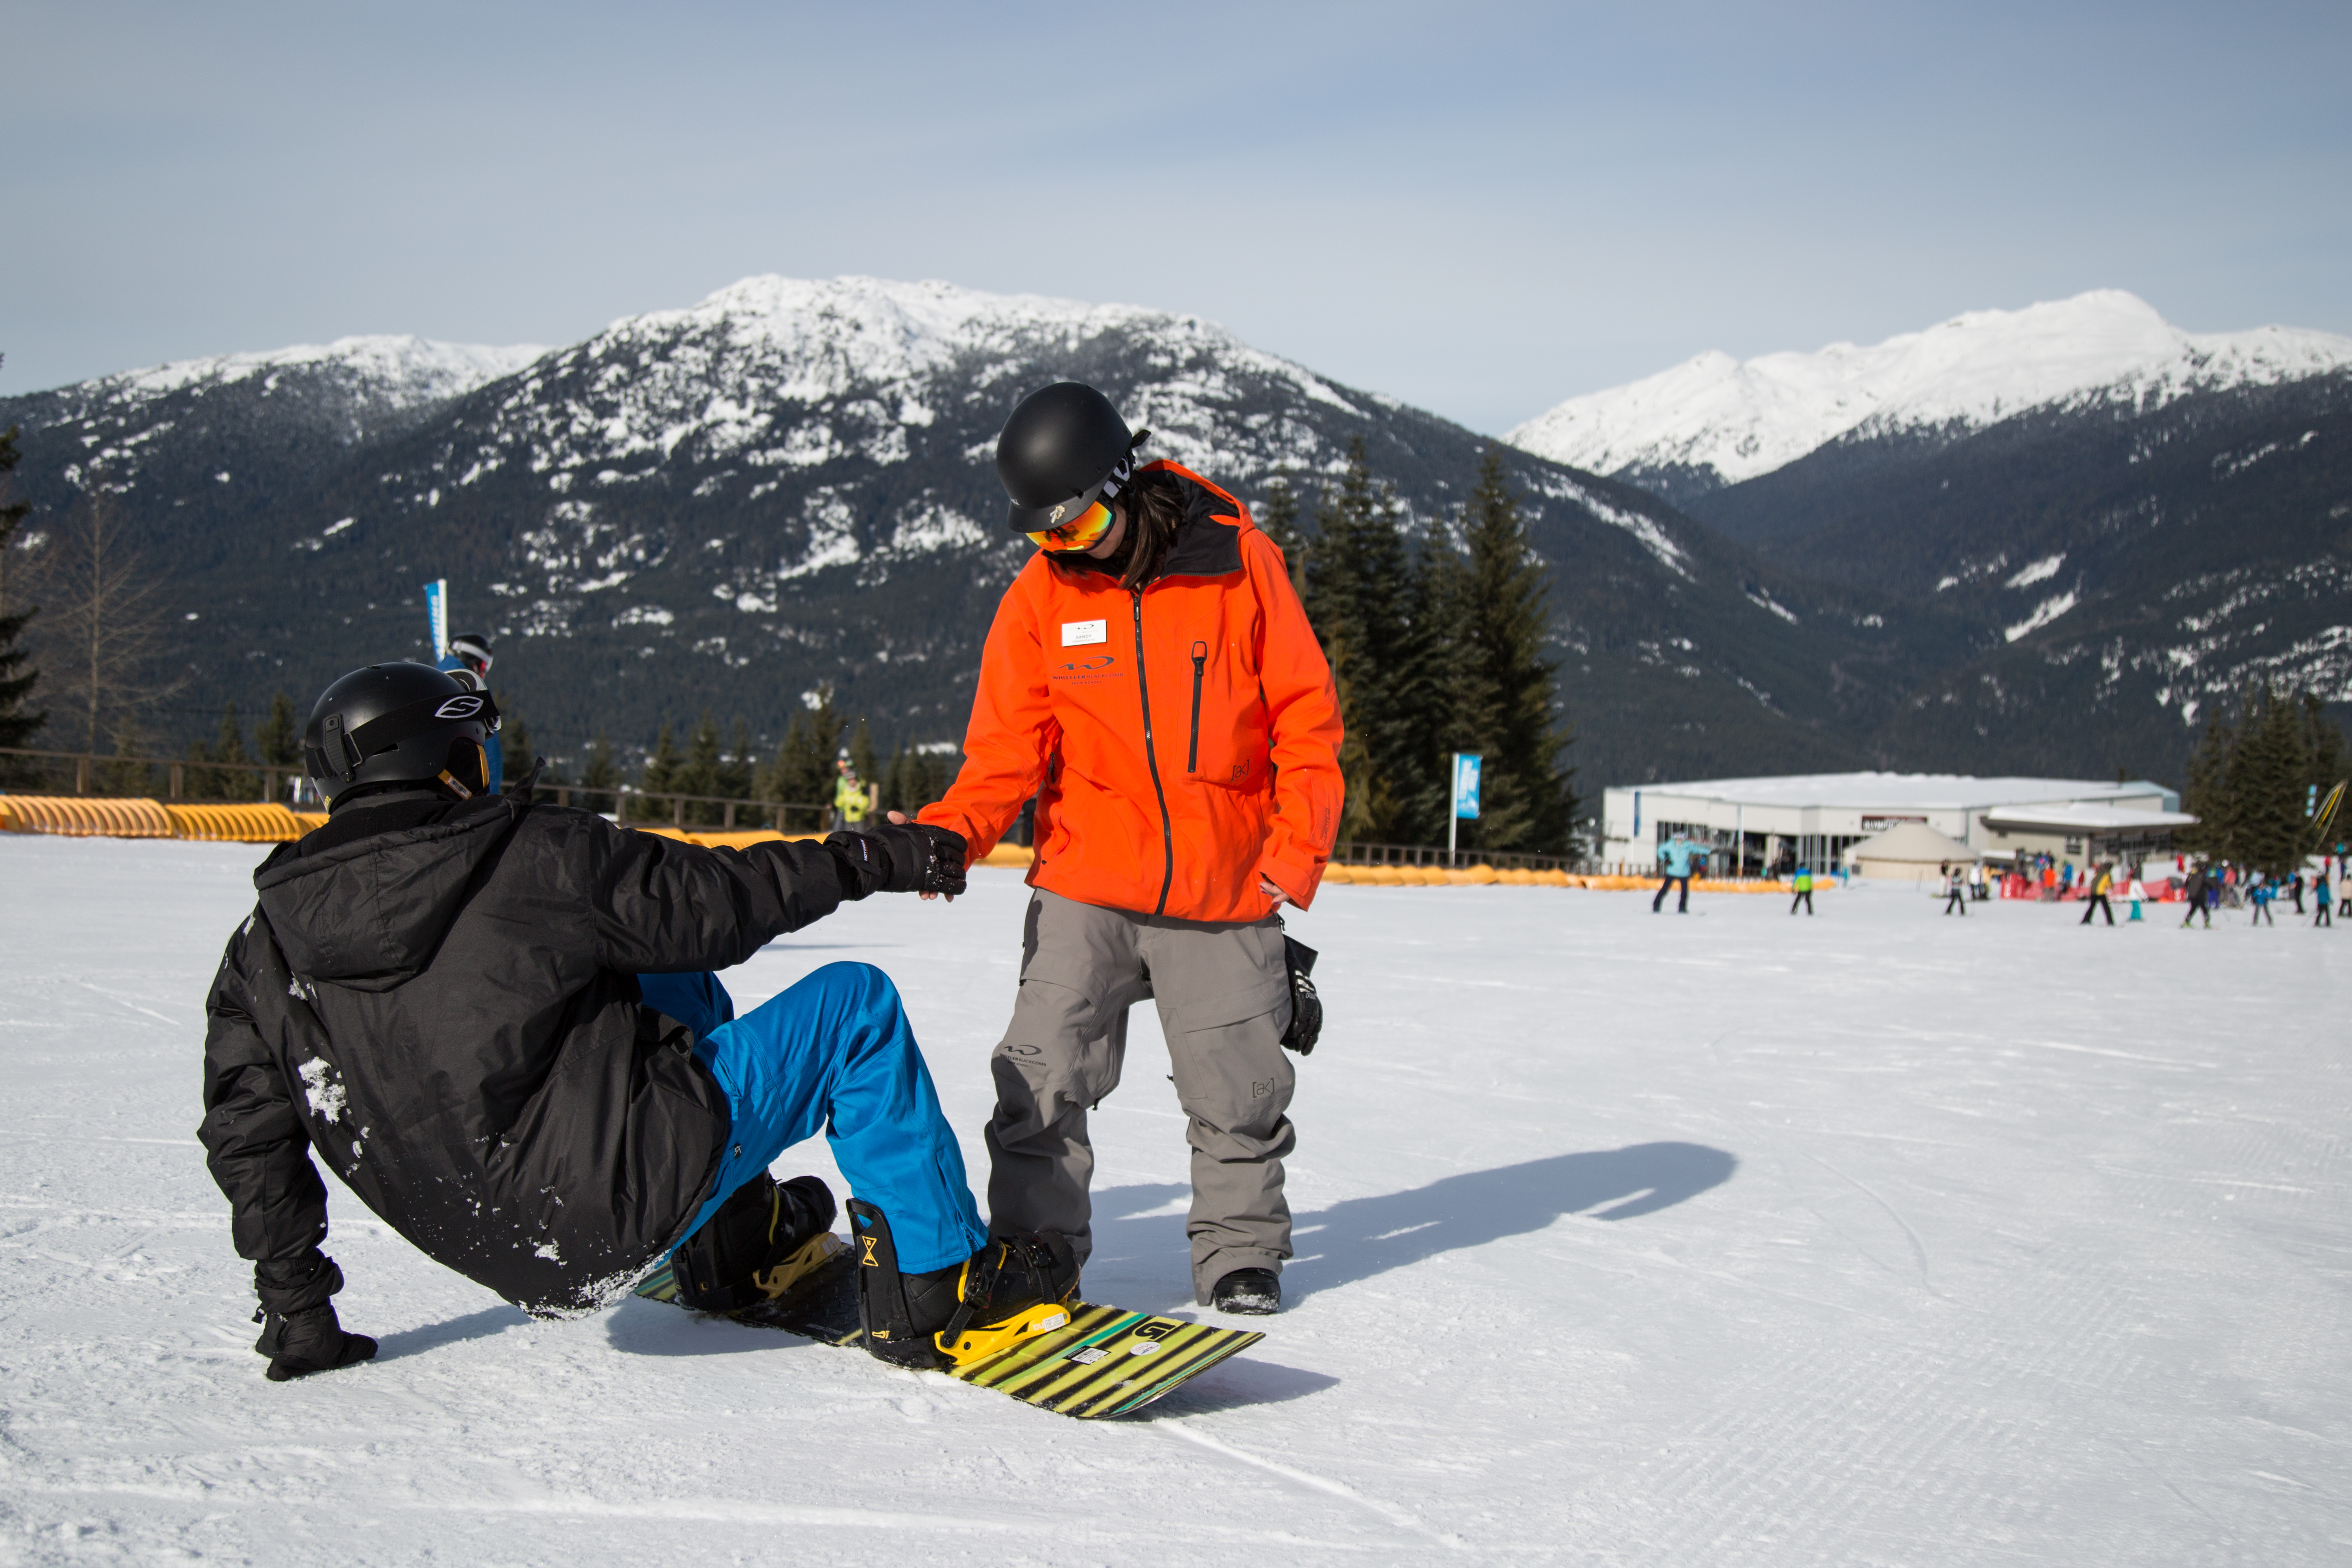 A Whistler Blackcomb snowboard instructor helps a young man stand up on his snowboard